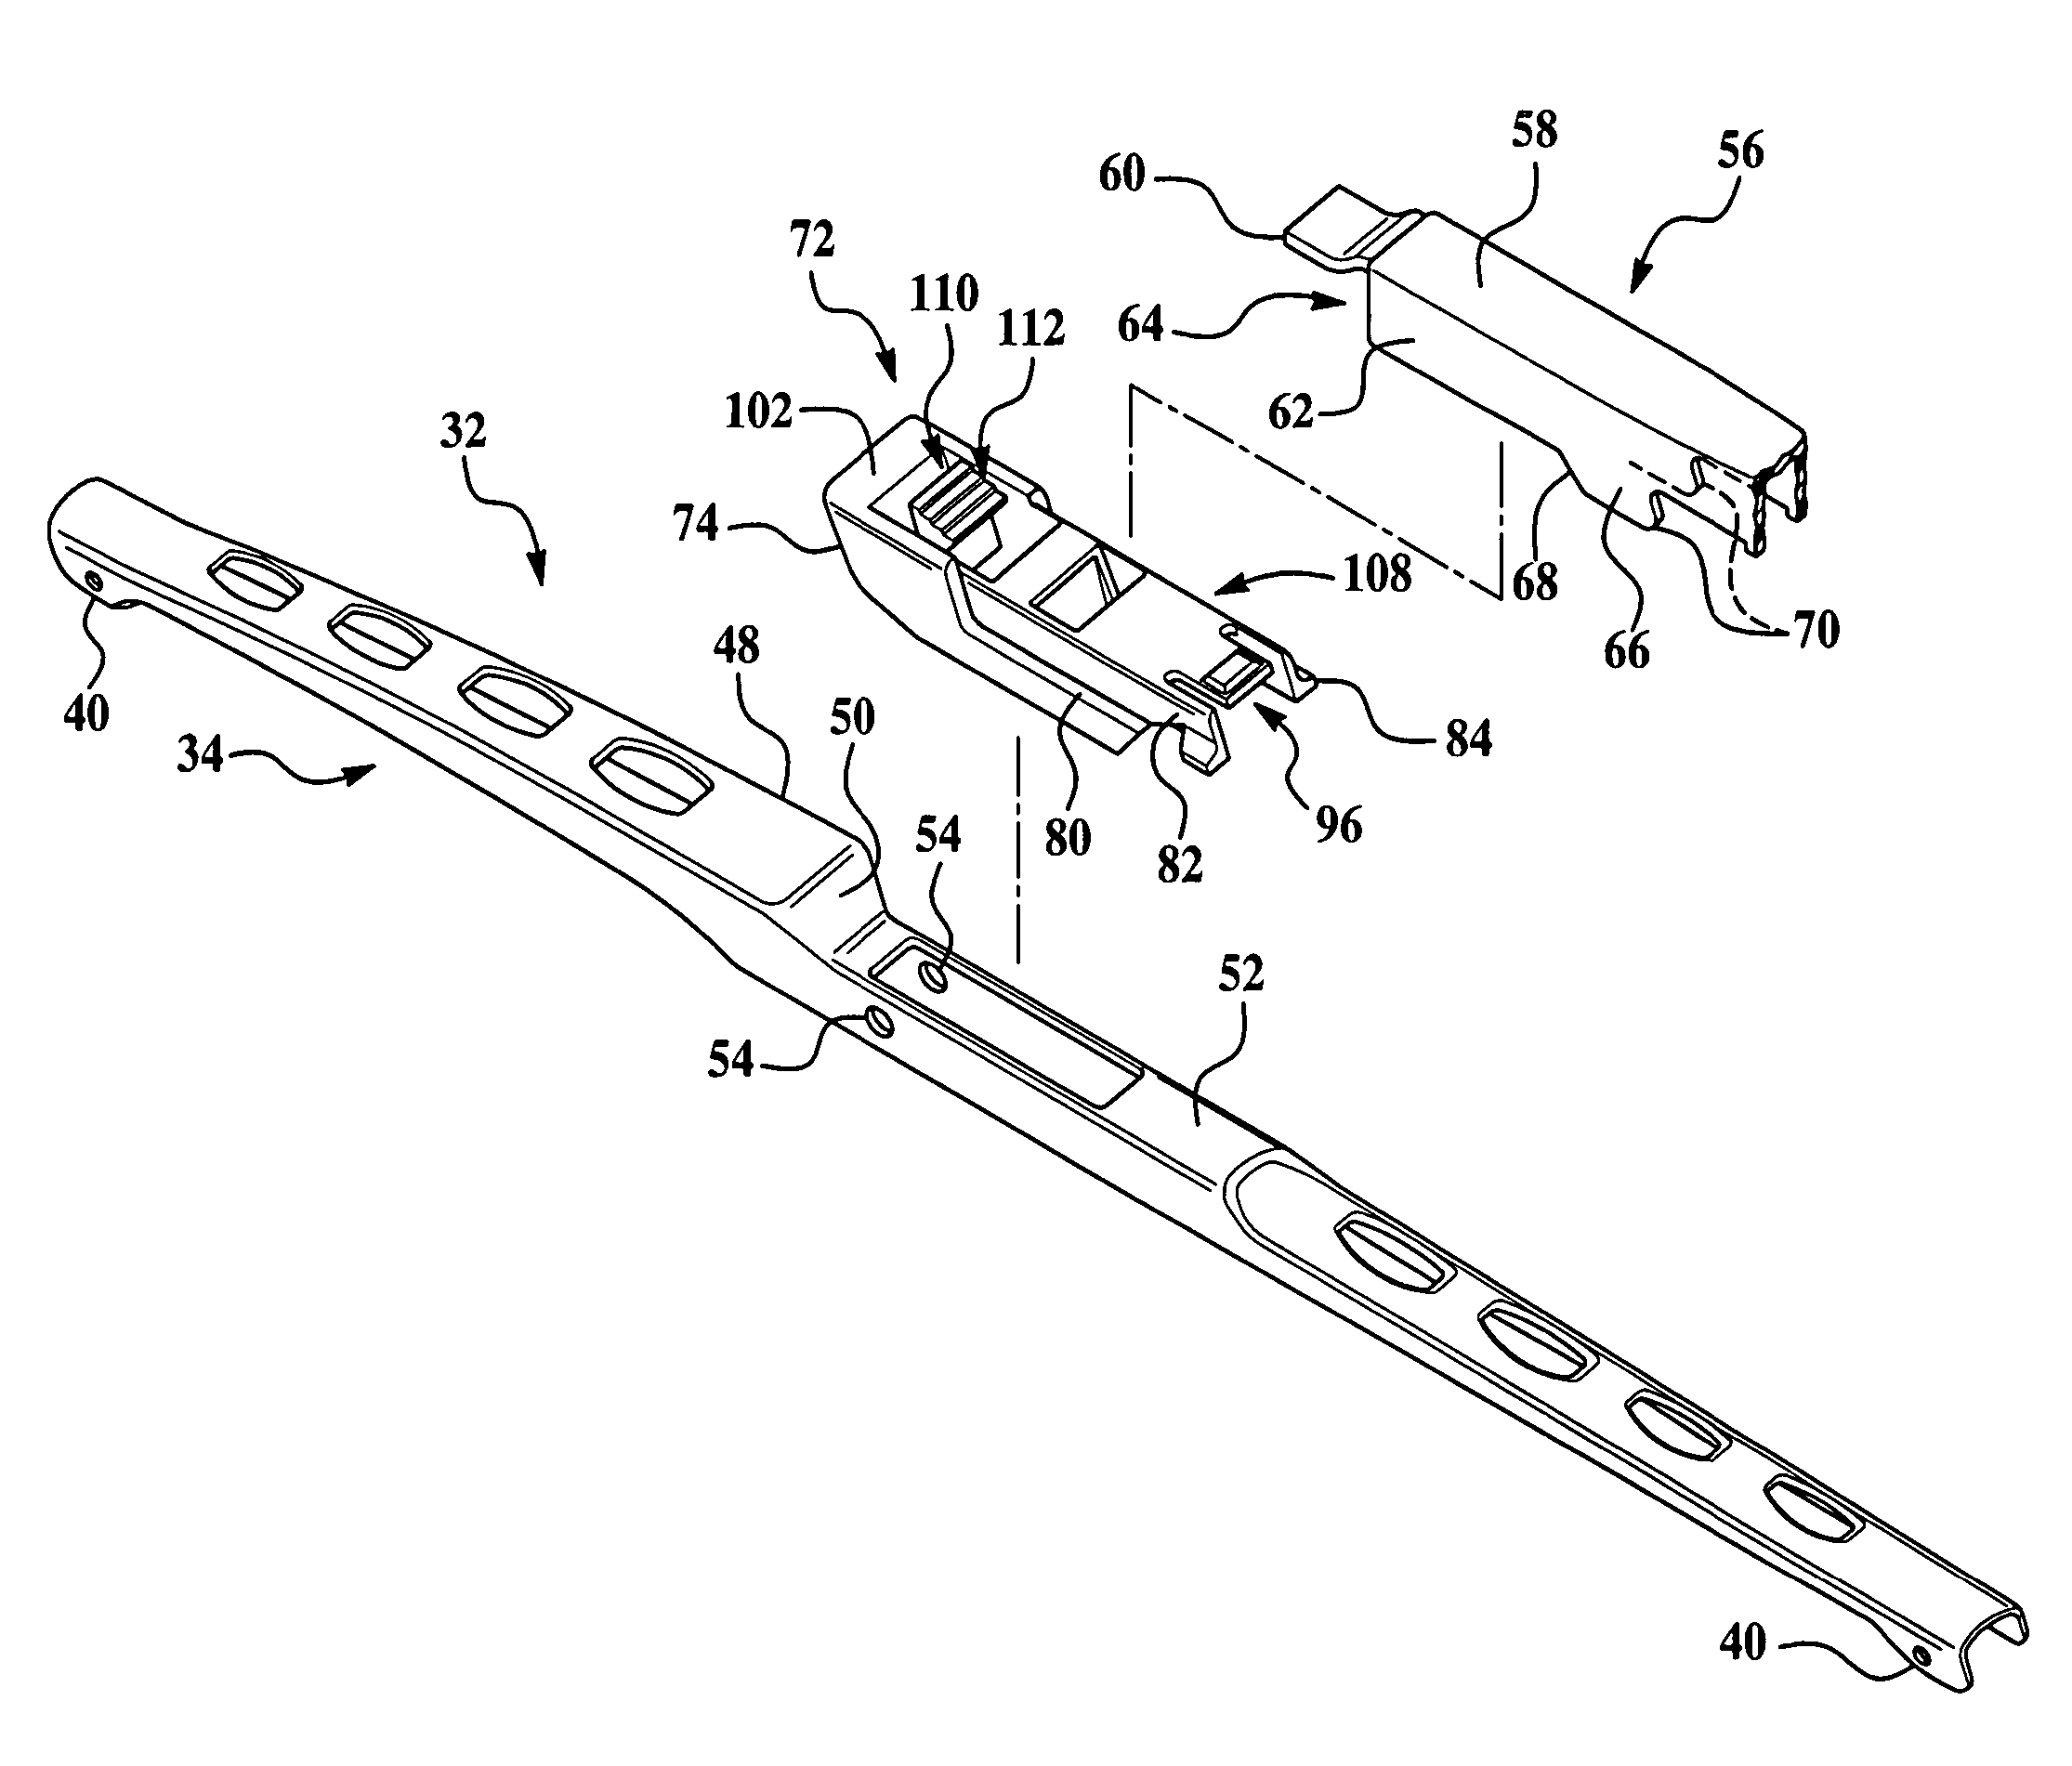 Wiper coupler and wiper assembly incorporating same